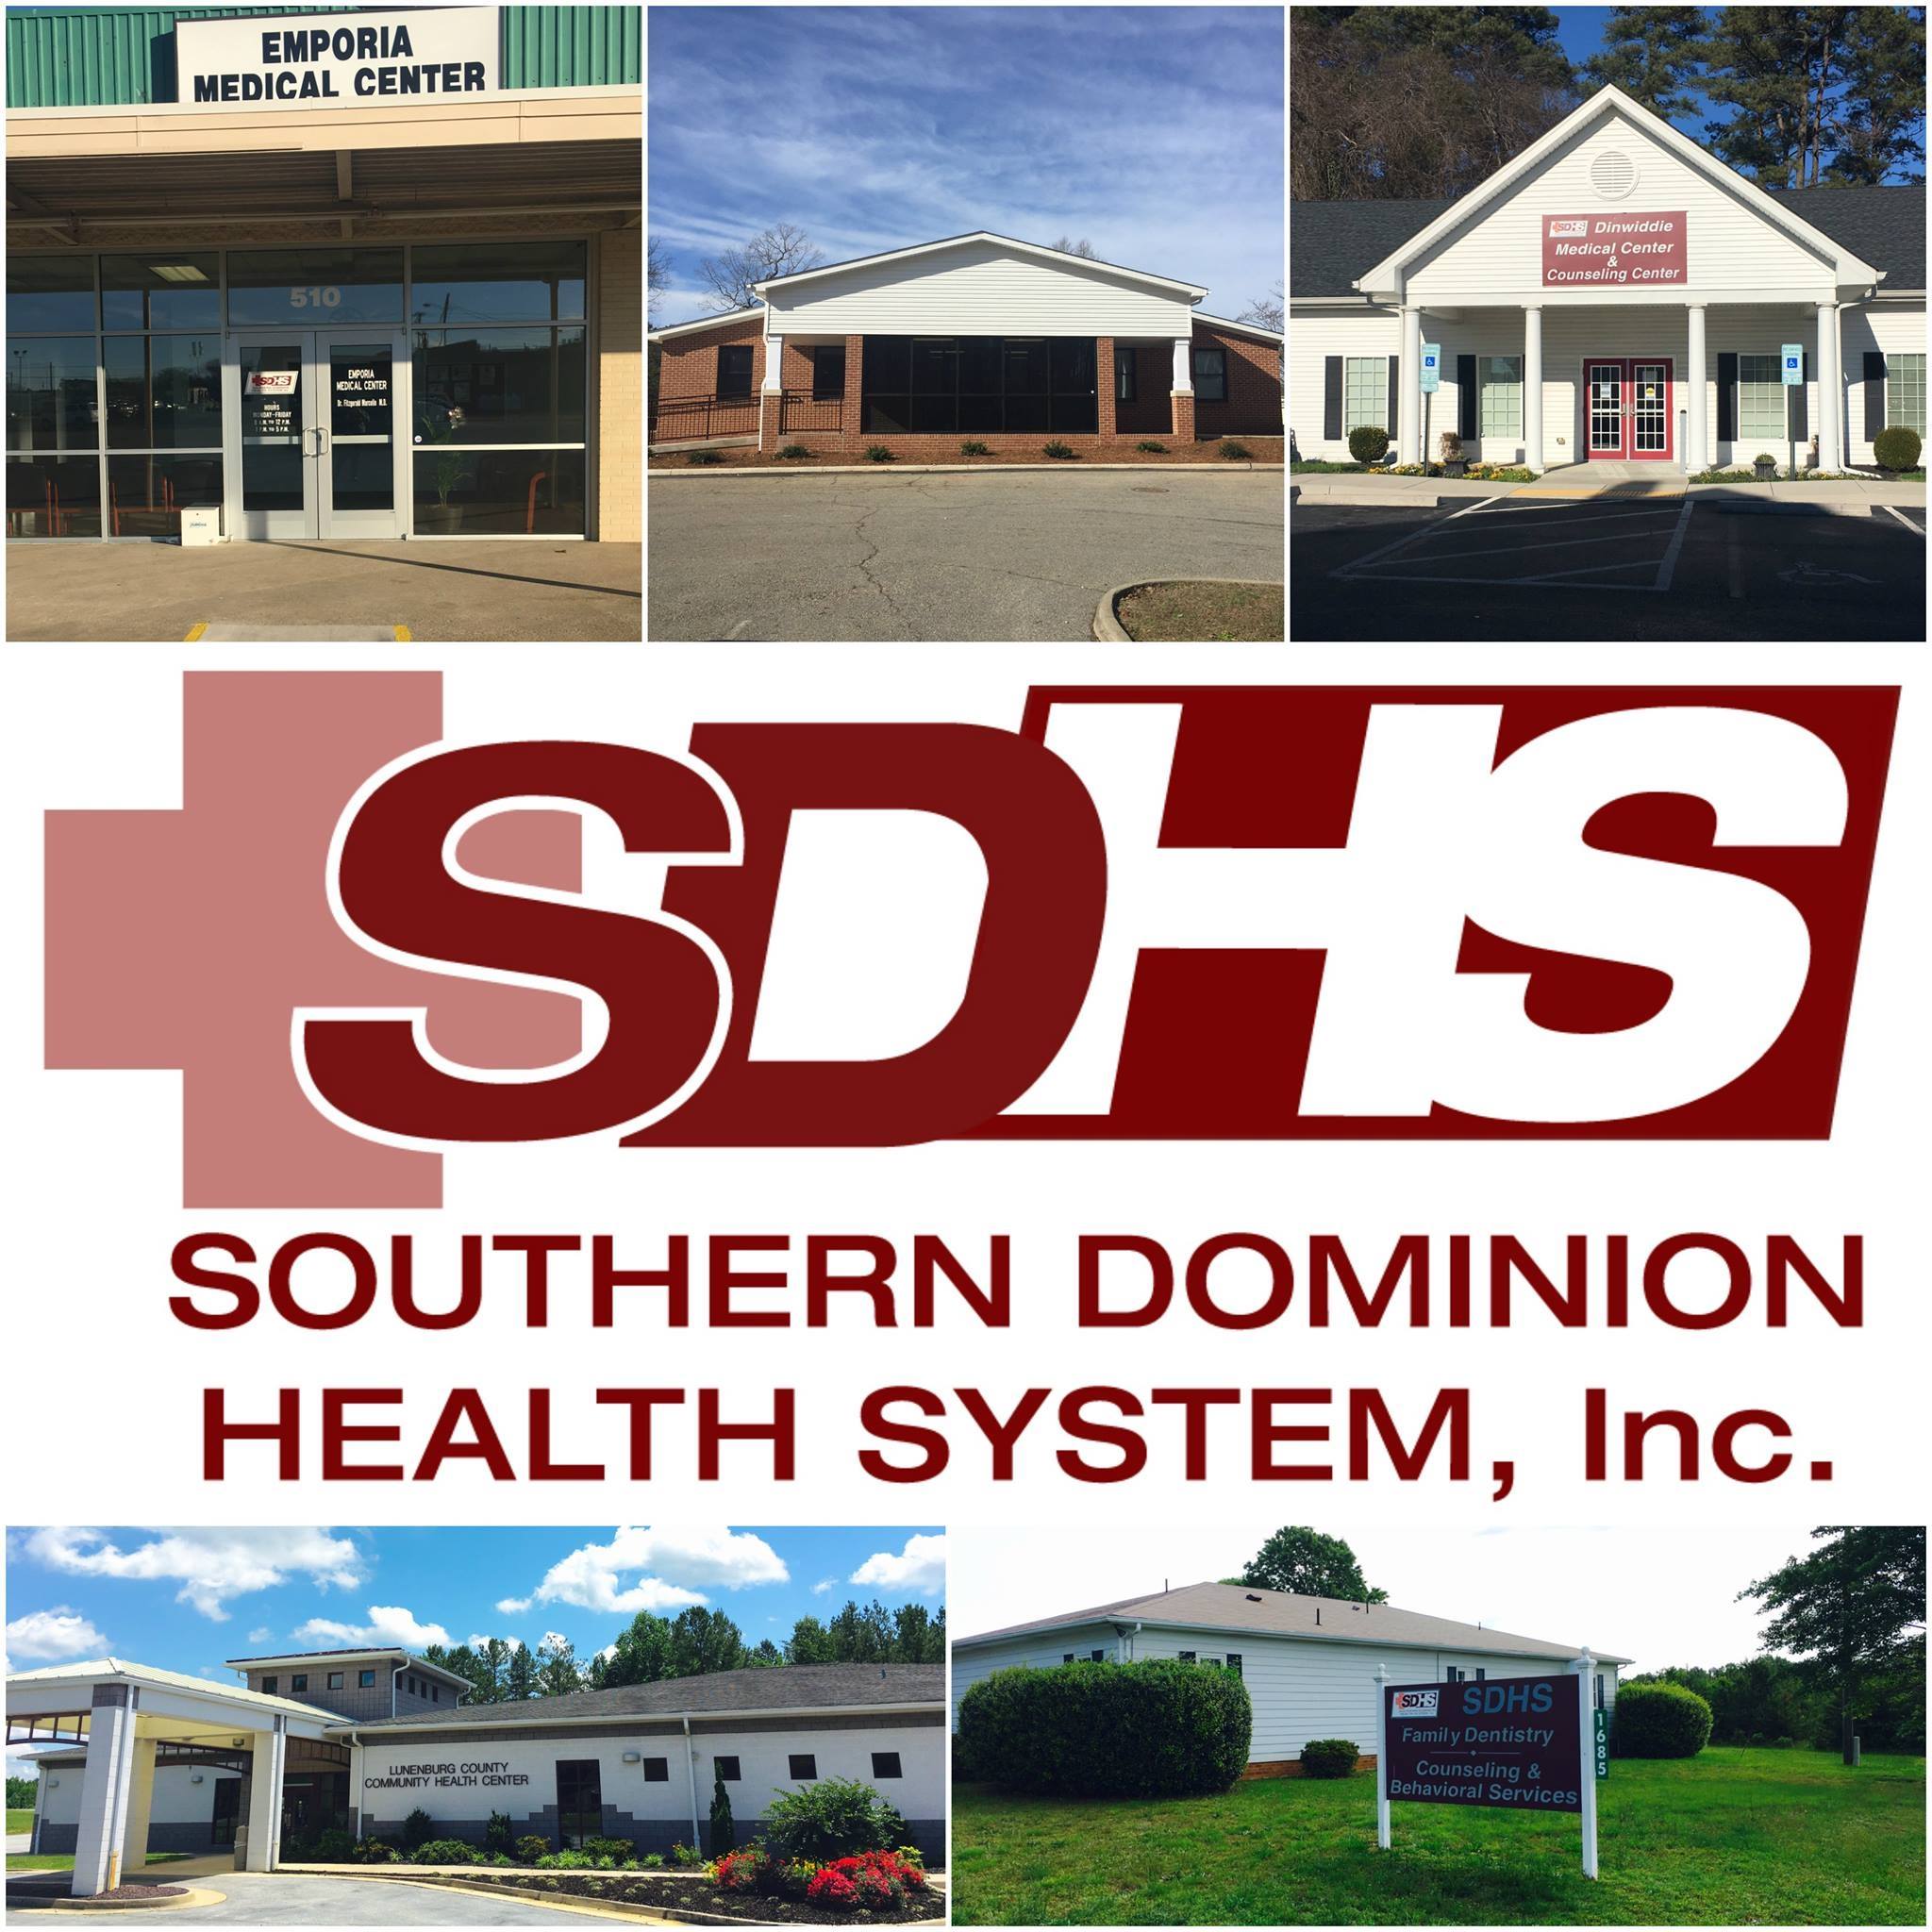 Southern Dominion Health System Inc